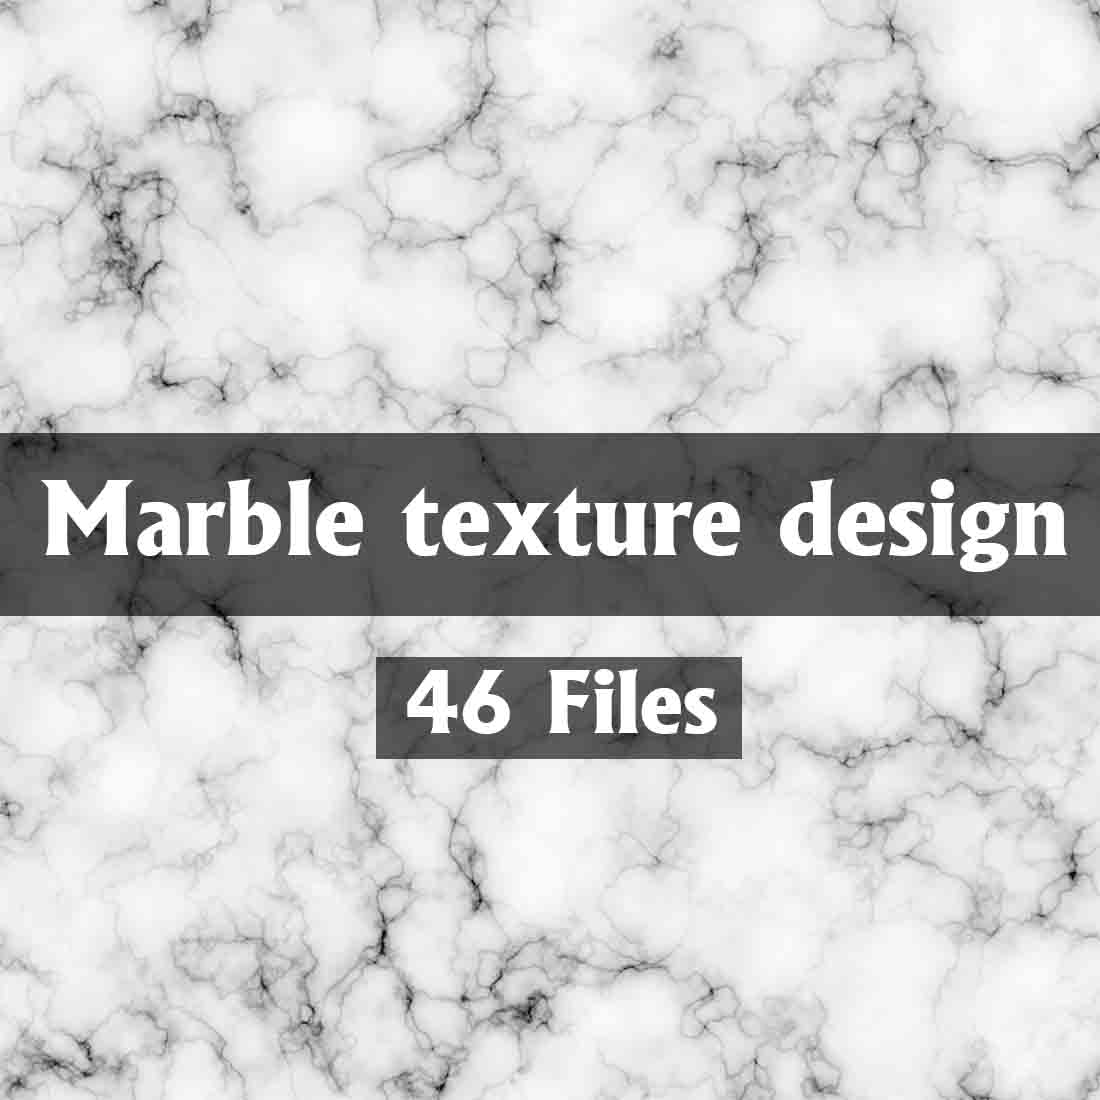 Marble texture design cover image.